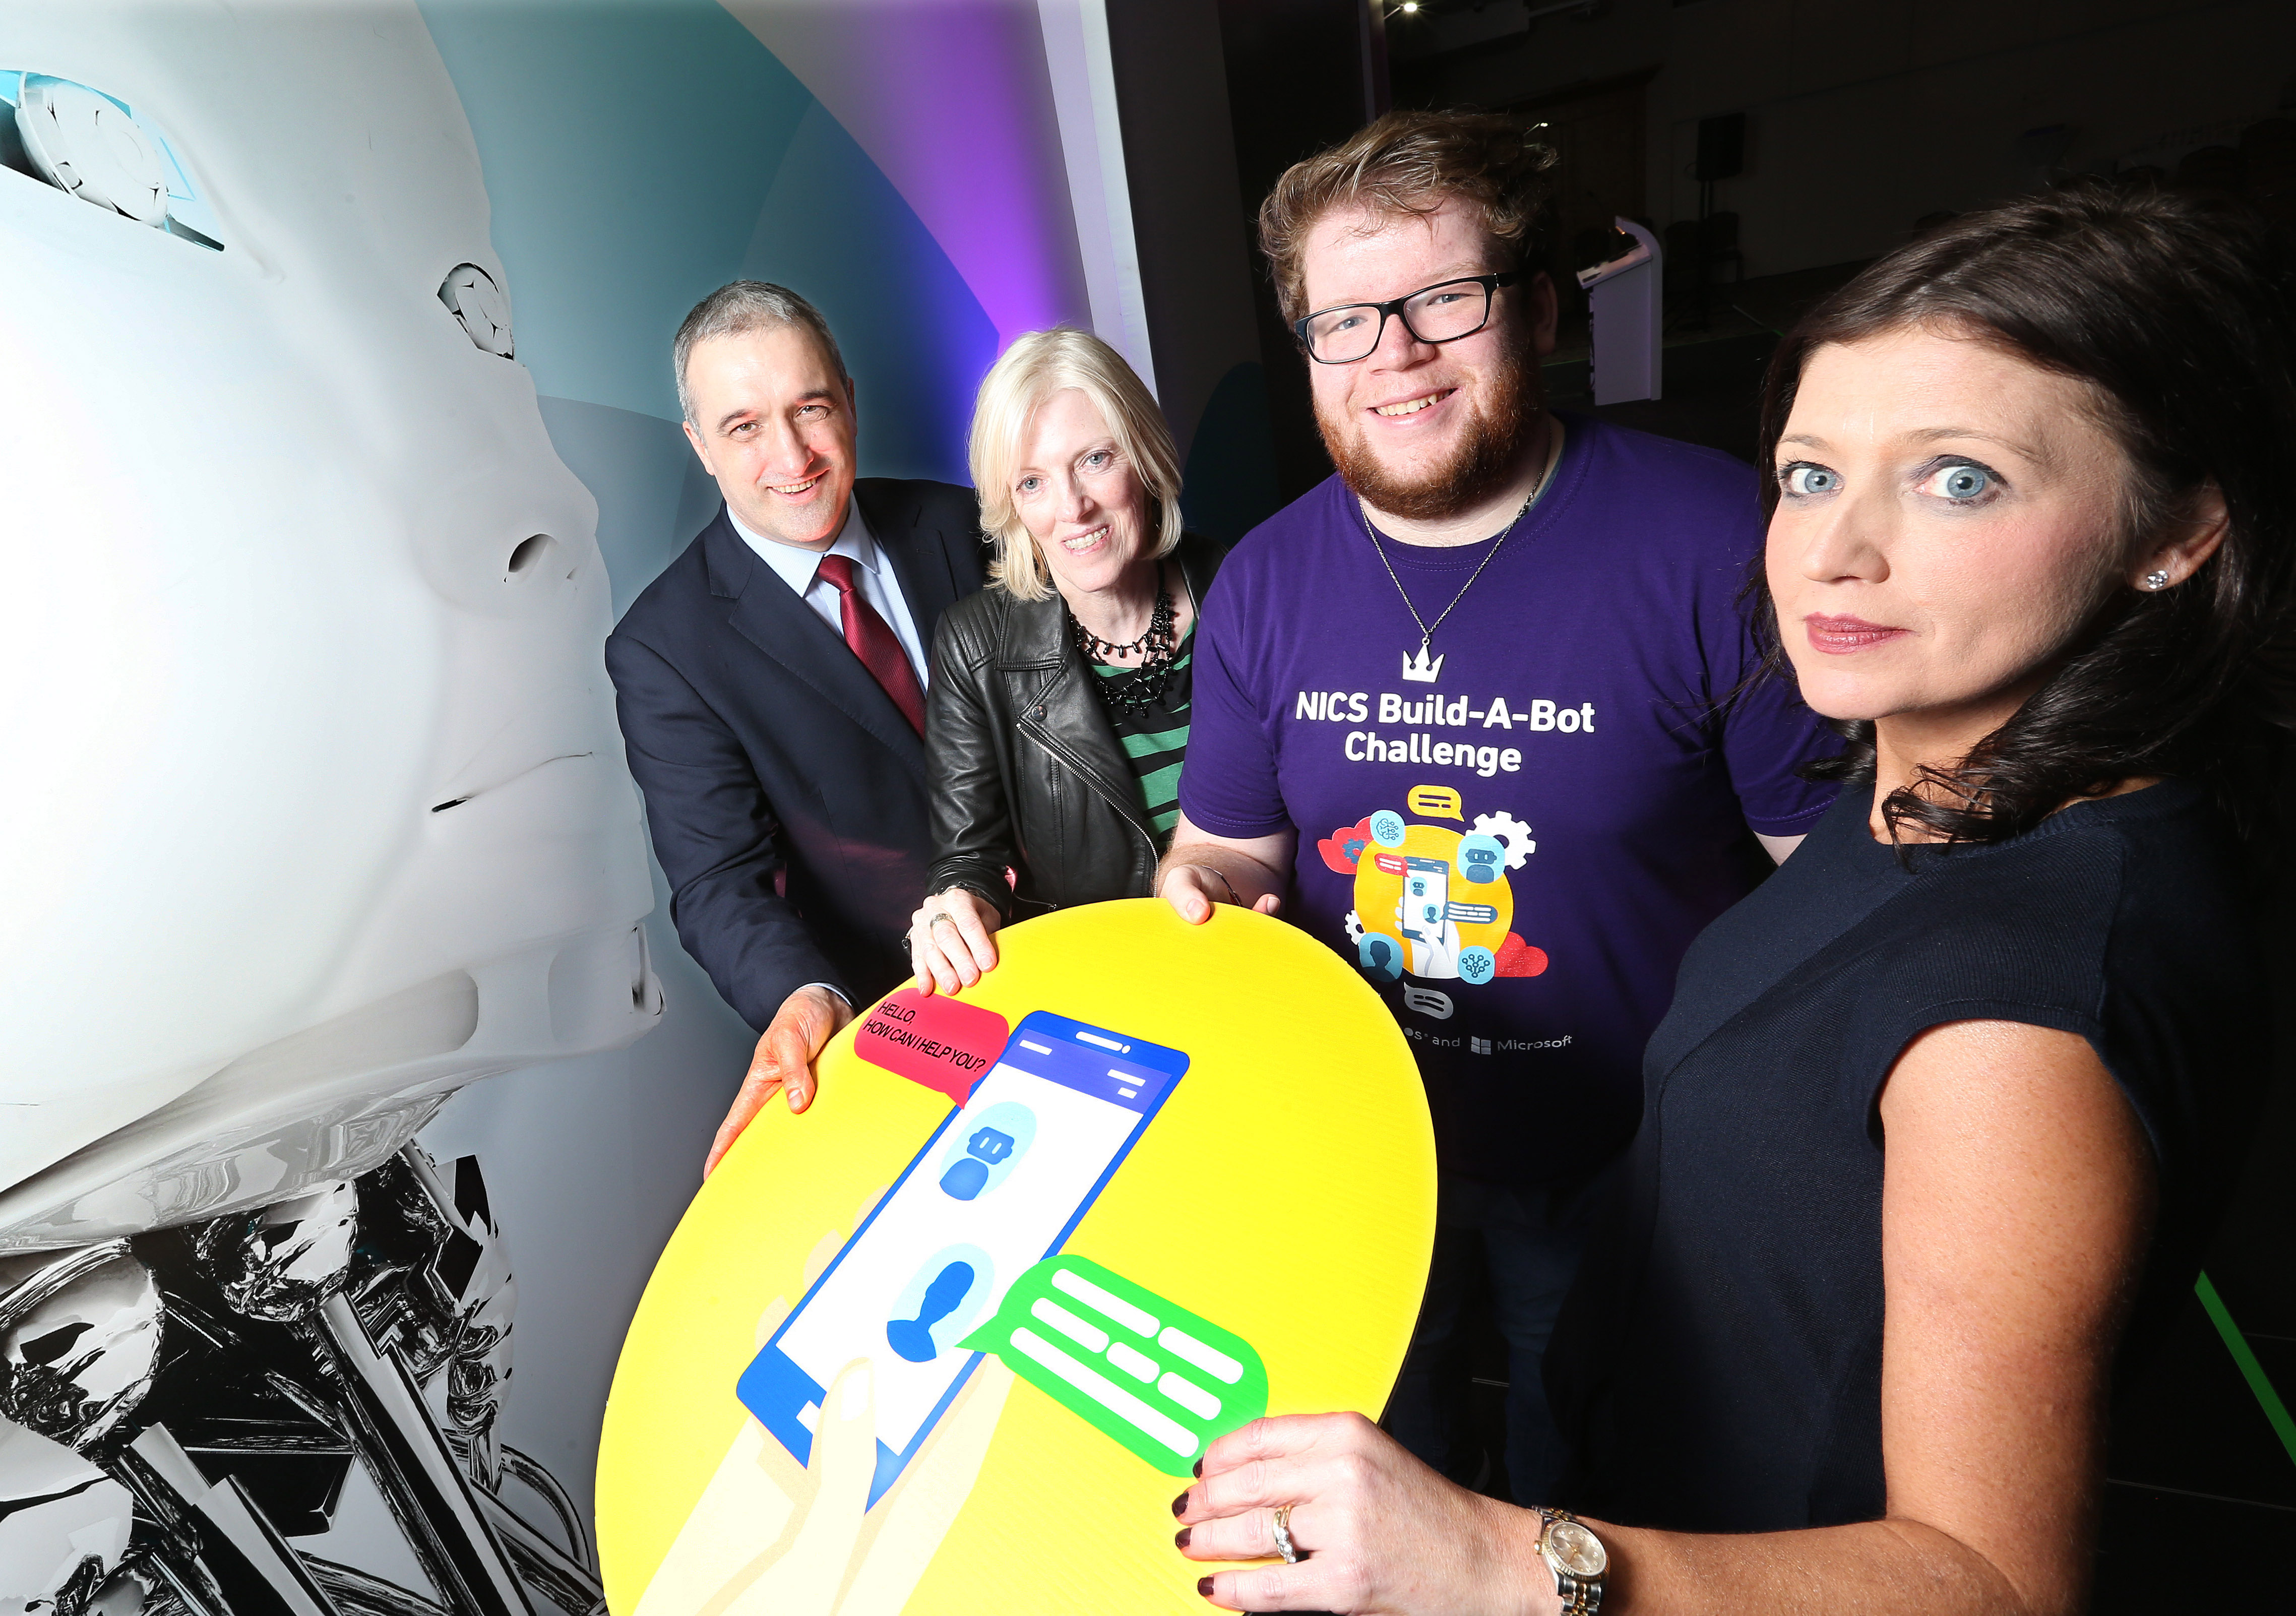 IT leaders collaborate with NI Civil Service to highlight chatbot capabilities